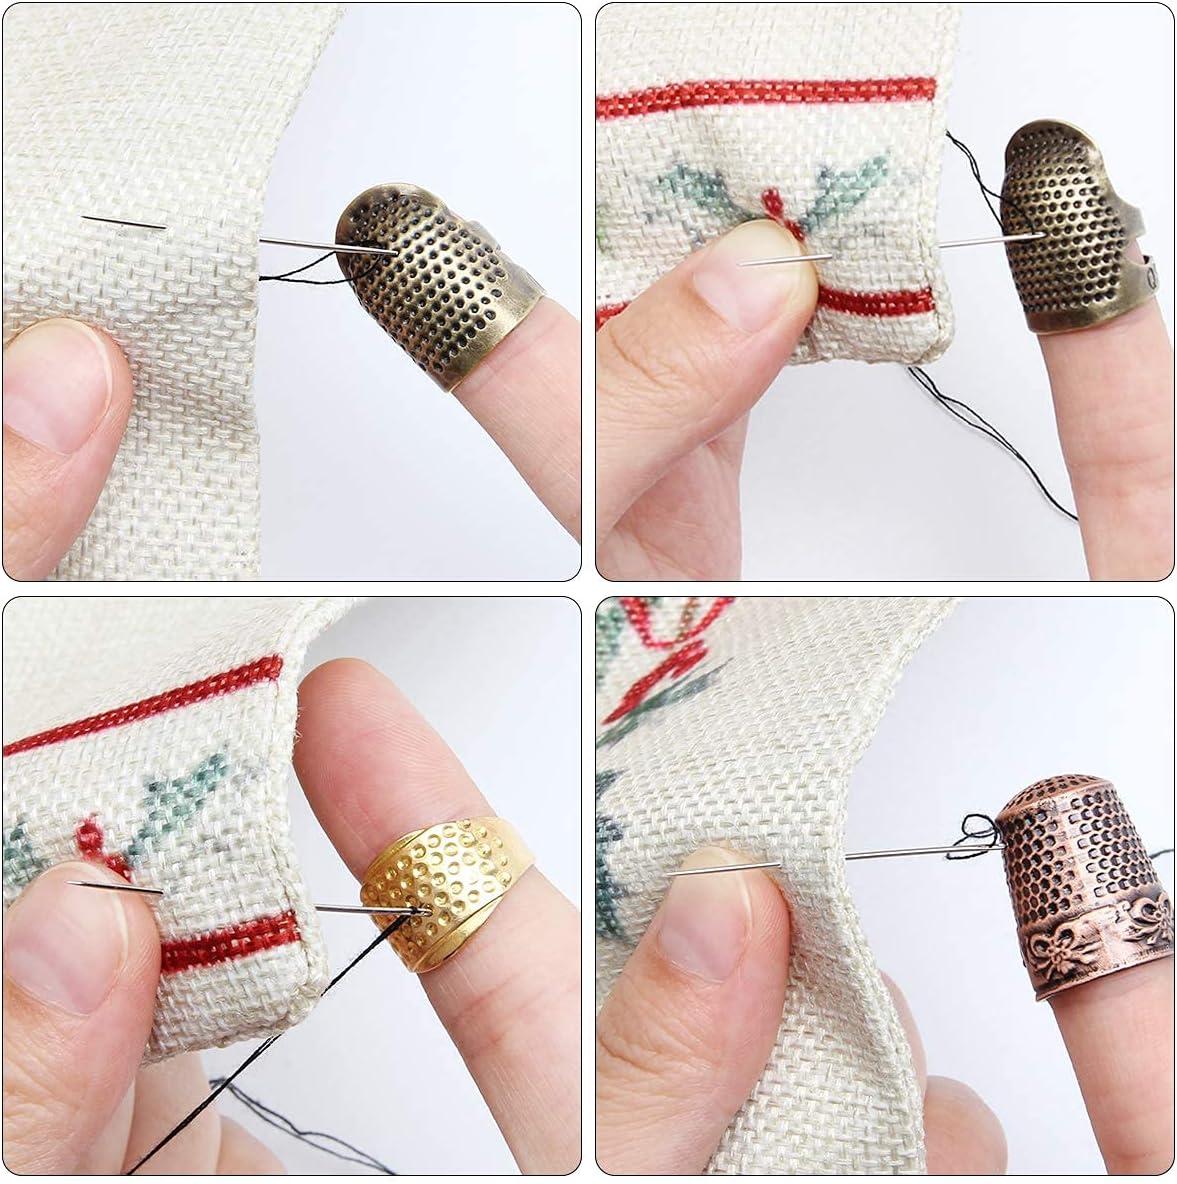 Sewing Thimbles For Fingers, Brass Thimble Sewing Thimble , -Stitch  Fingertip For Hand Sewing,Needlework Embroidery,DIY Handwork 